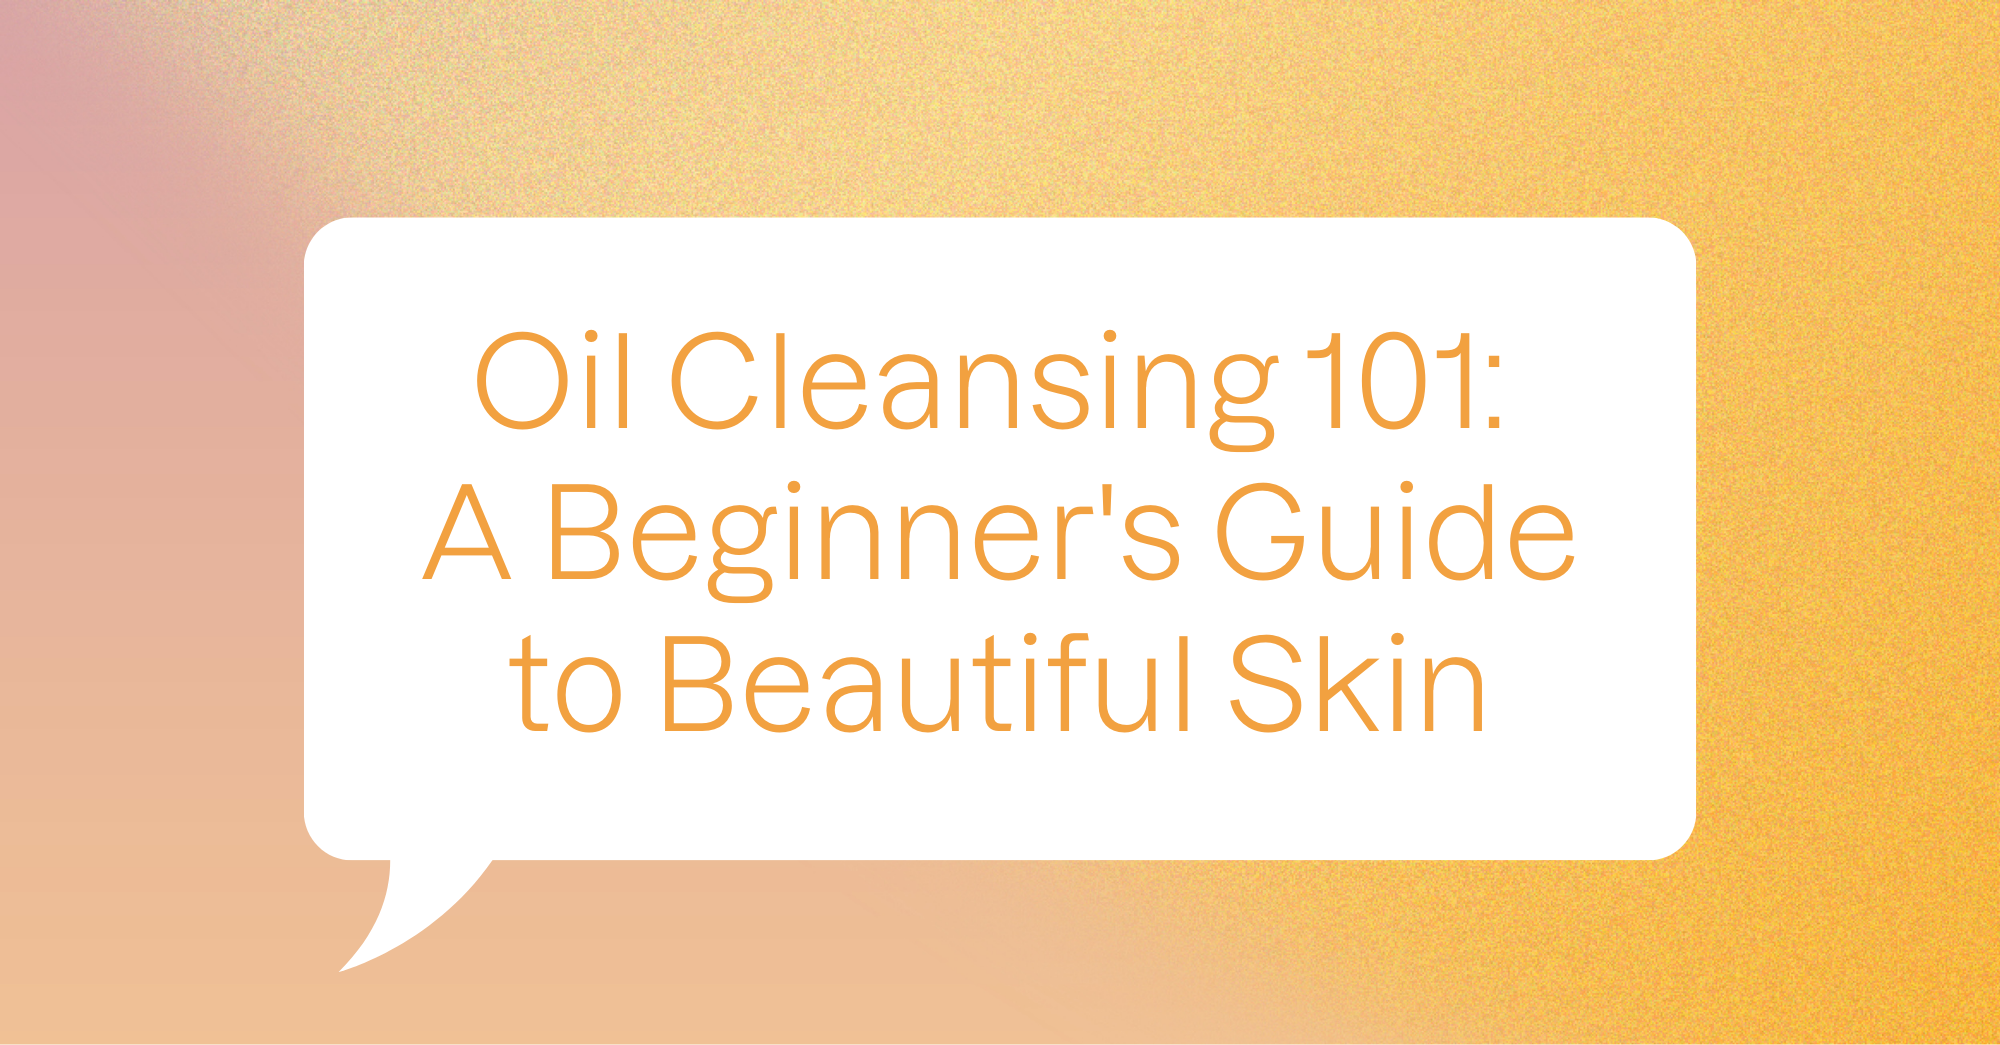 Oil Cleansing 101: A Beginner's Guide to Beautiful Skin